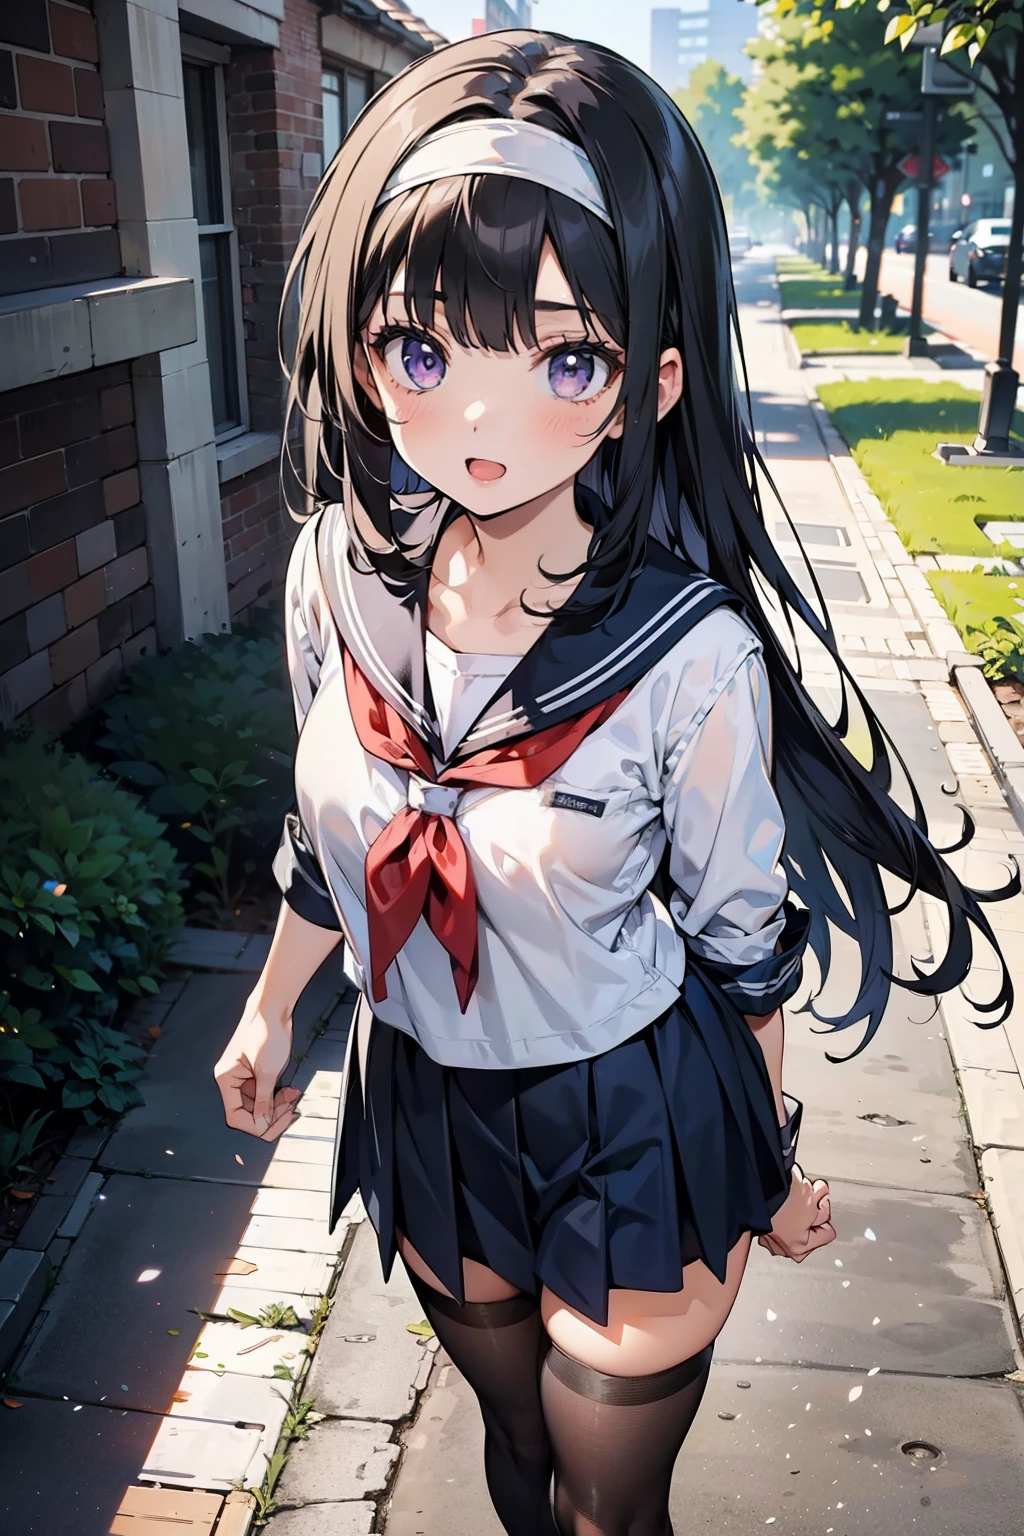 body 8 times longer than head, 8k, highest quality, masterpiece, Super detailed, ultra high resolution, realistic, RAW photo, absolute resolution, black hair, High school girl wearing a navy sailor suit, Anime 2D rendering, realistic young anime school girl, ((White headband)), purple eyes, small breasts, tall, slanted eyes, (school scenery), black stockings, bright color, open your mouth, Dark blue skirt,  Straight Long Hair, Bangs Patsun, position looking down from above, Music Classes, Playing the flute, 